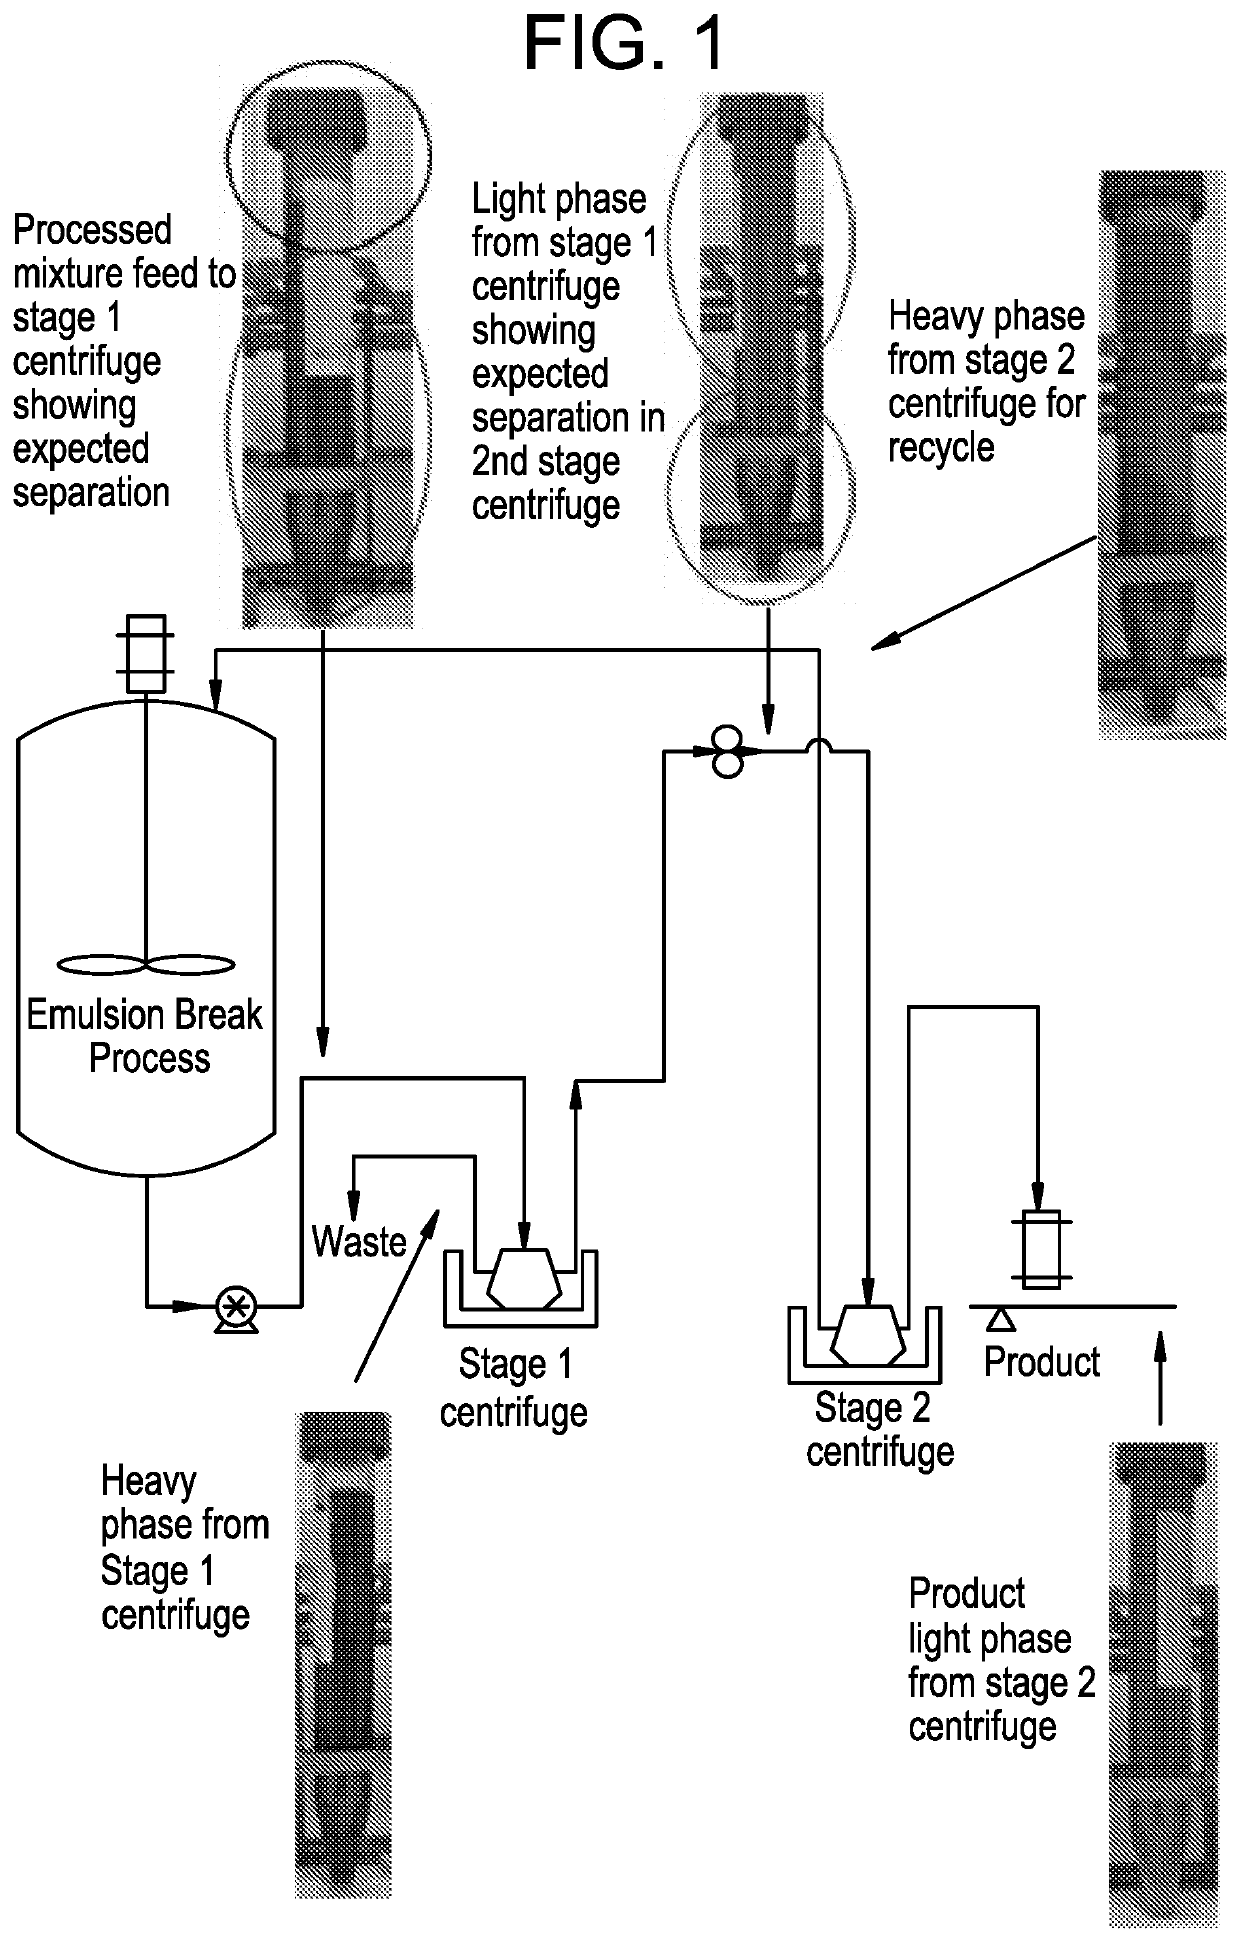 Double centrifugation process for nutritive oil purification